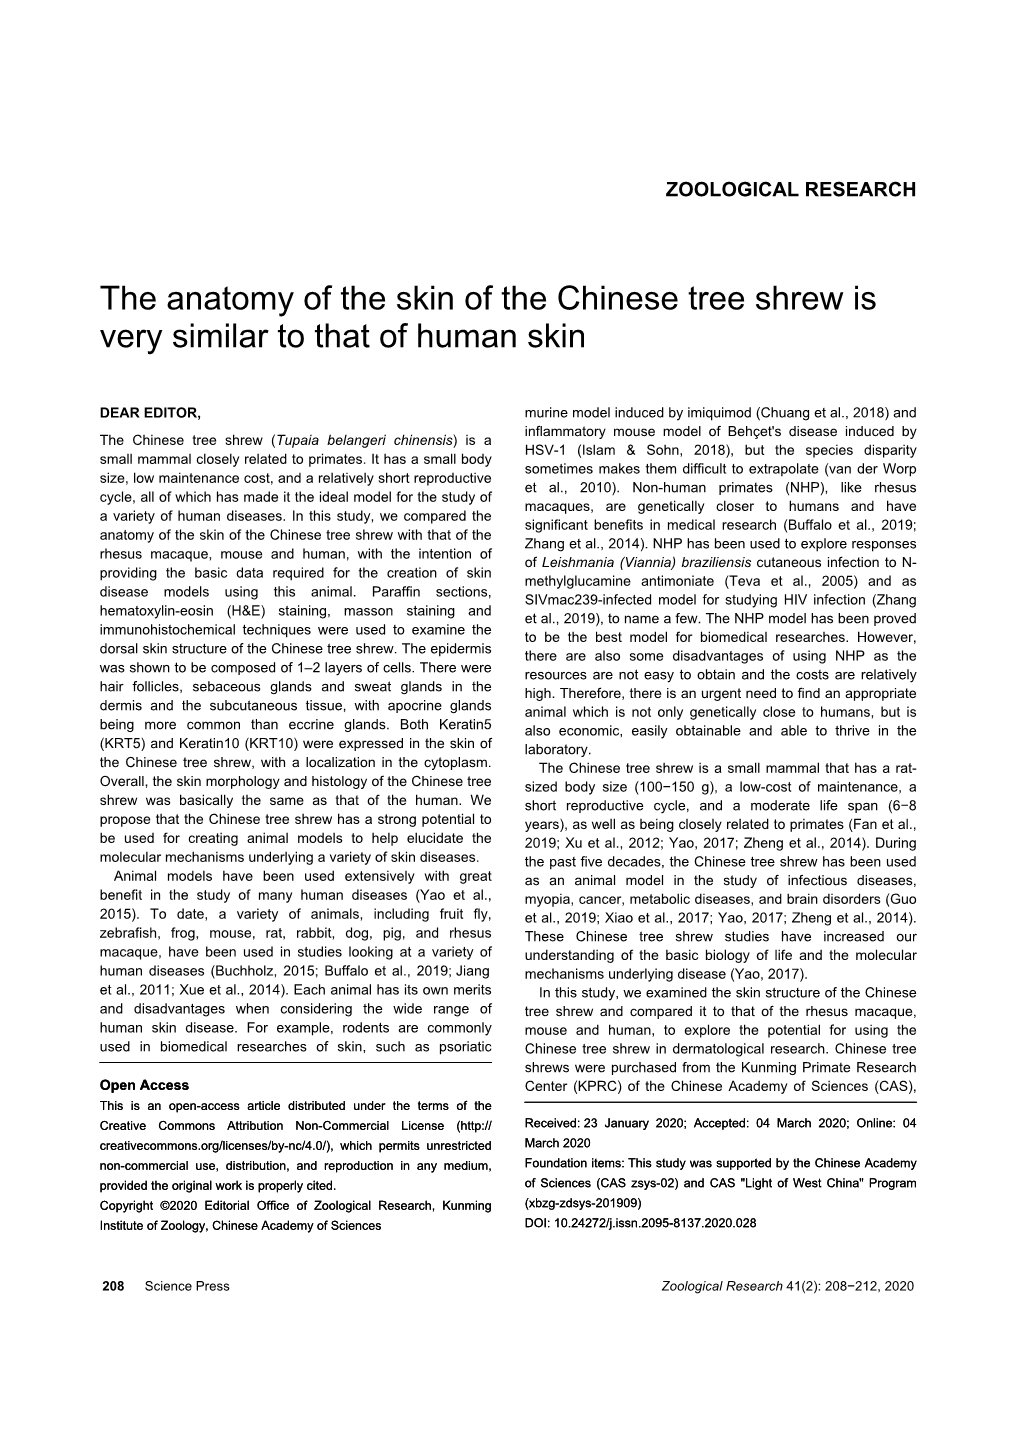 The Anatomy of the Skin of the Chinese Tree Shrew Is Very Similar to That of Human Skin